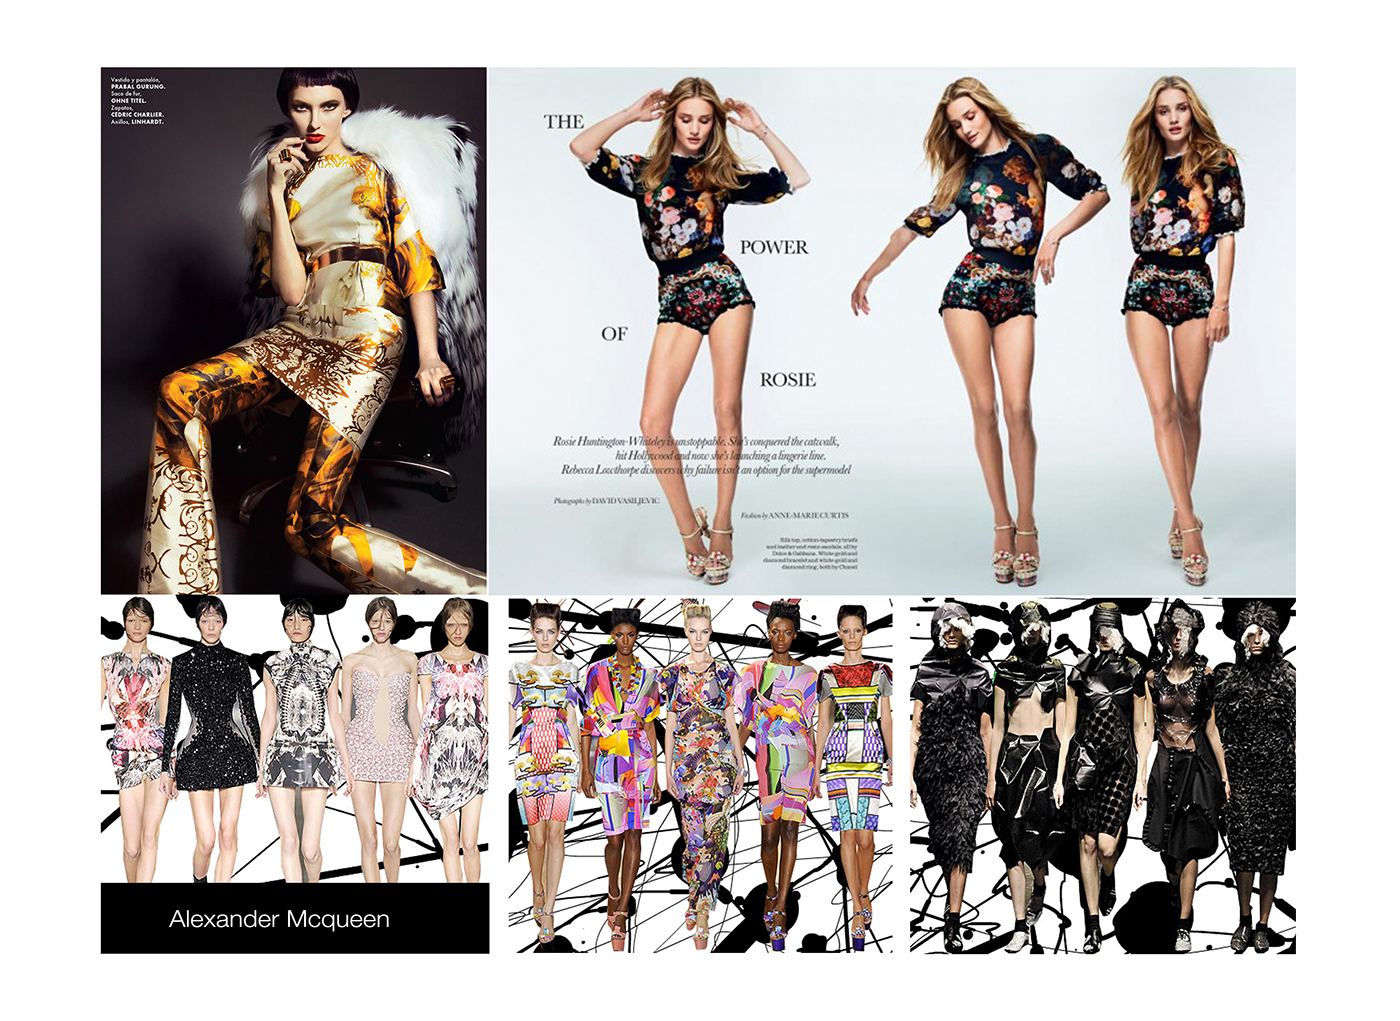 Pattern Changing Clothing thesis Futuristic Clothing Wearable product Fashioning Technology